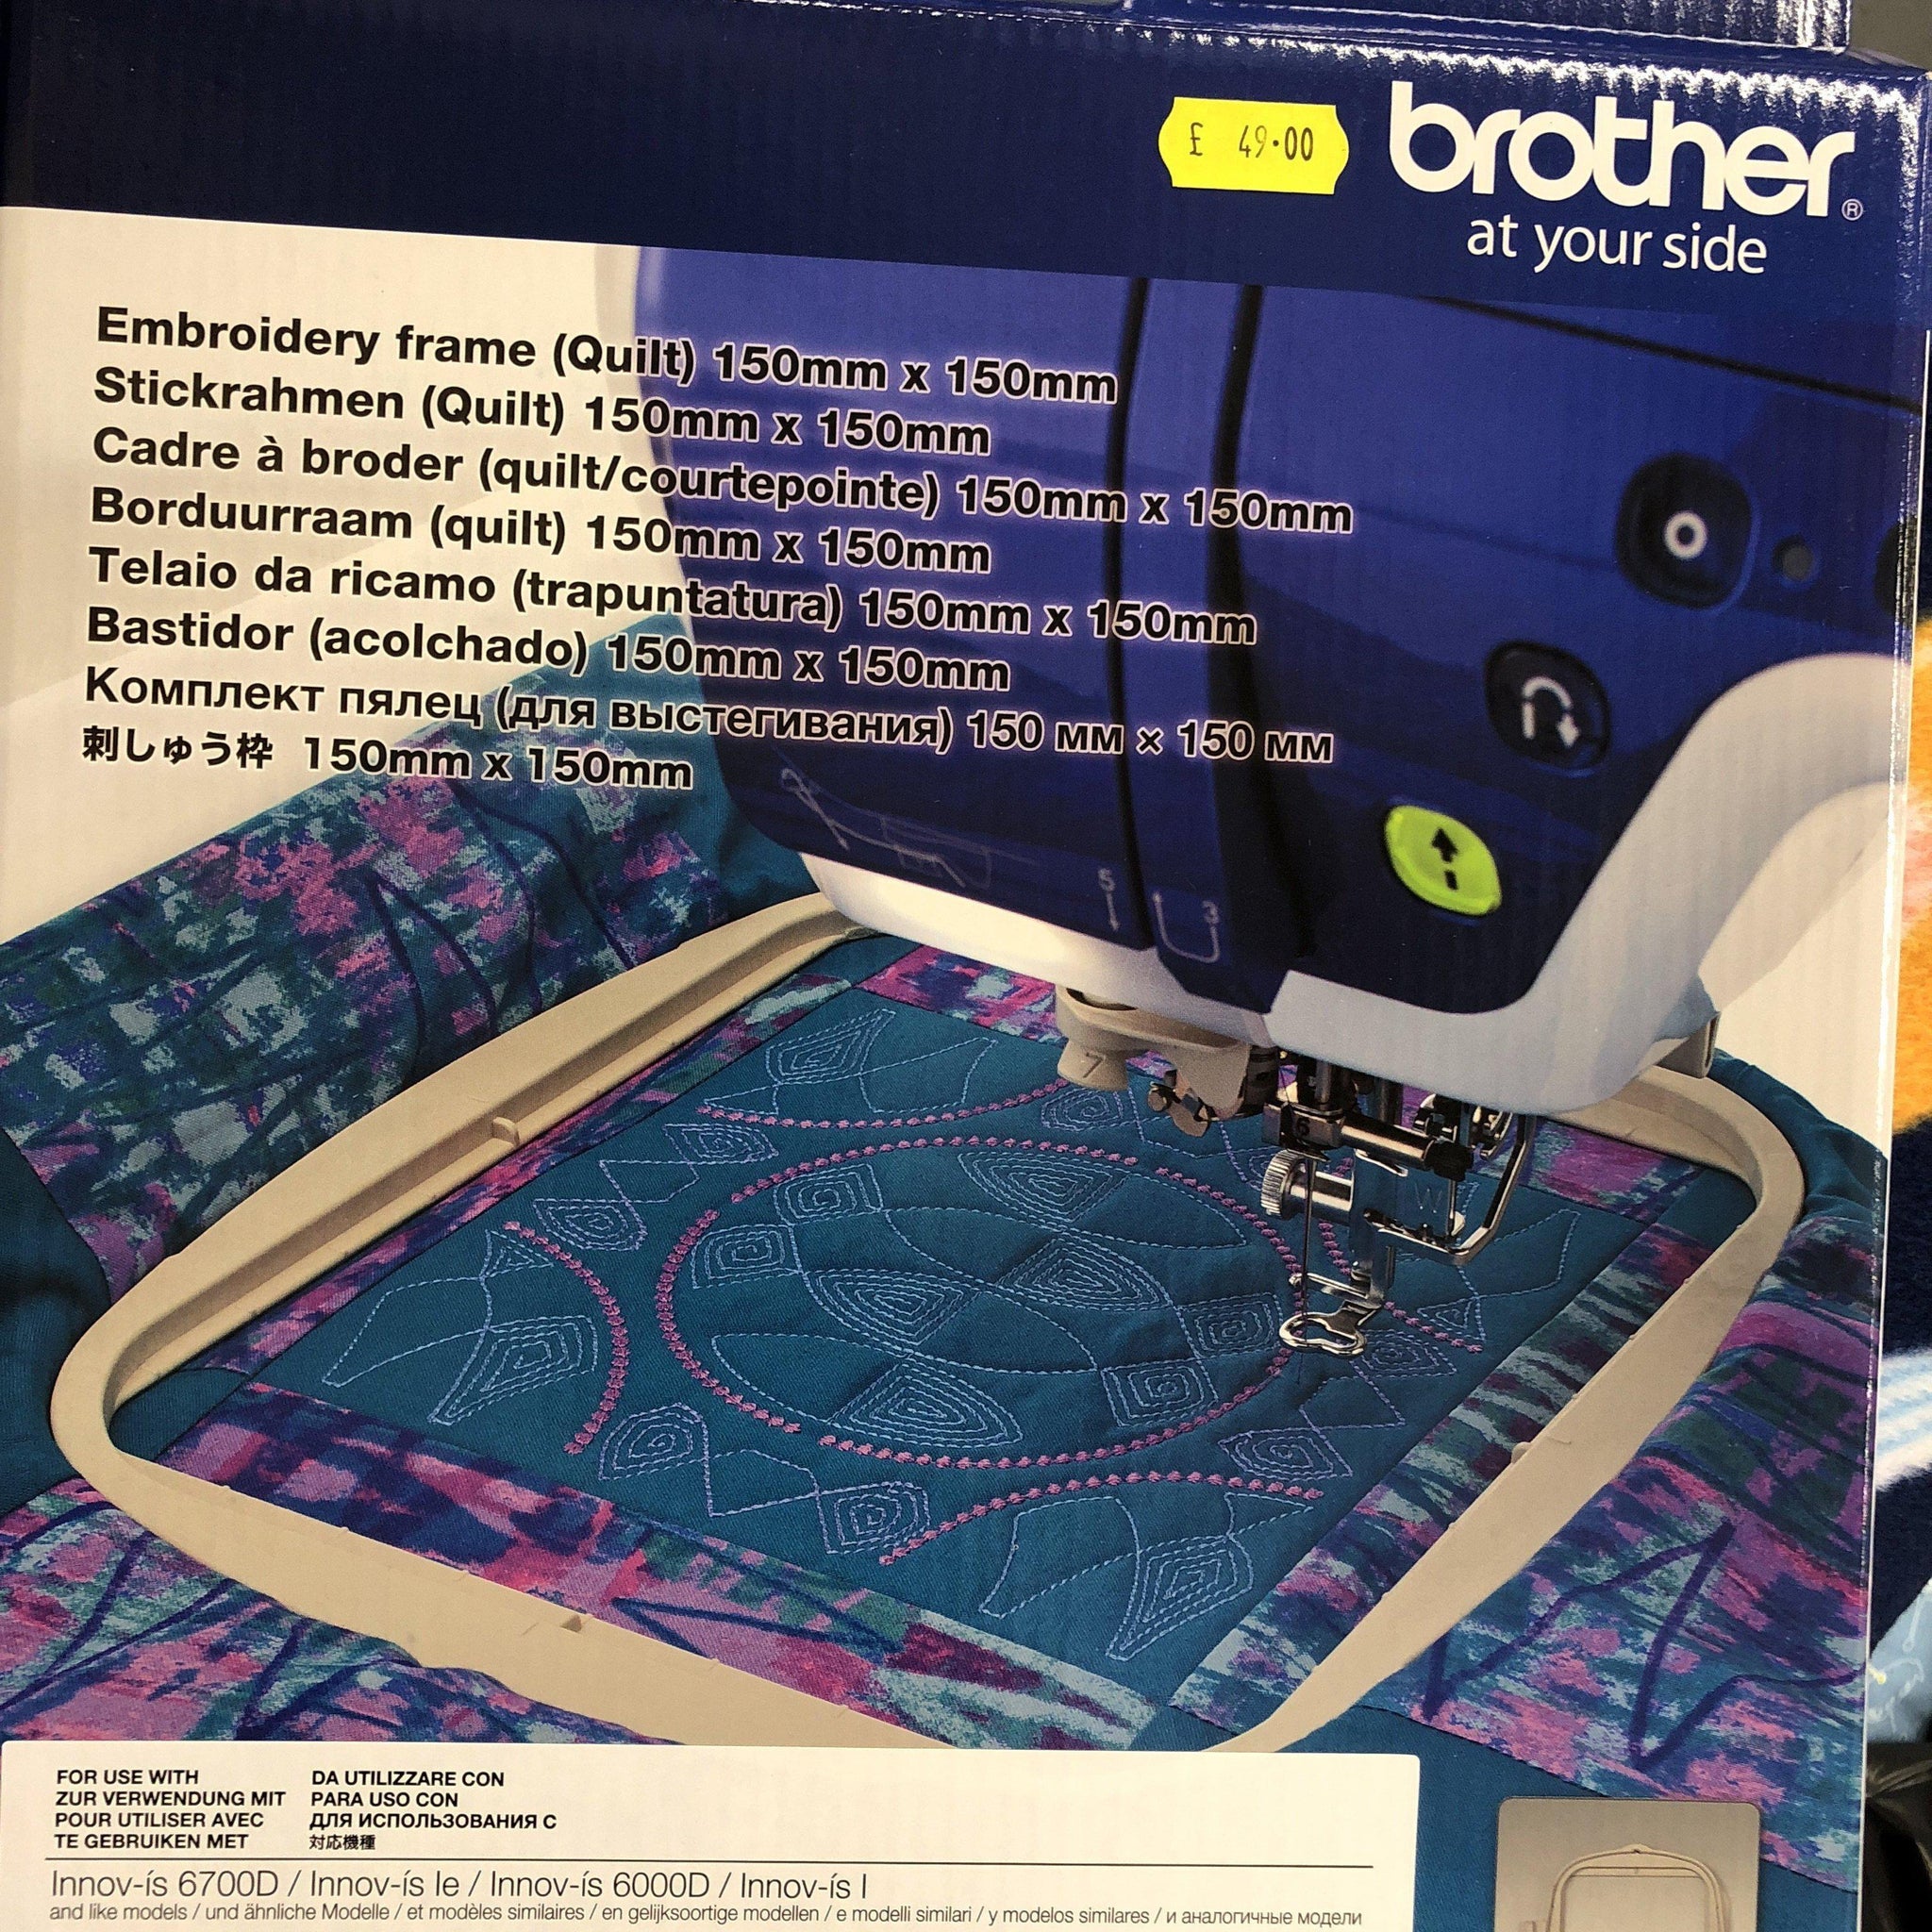 Brother Quilt Embroidery Frame Hoop 150mm x 150mm XG6761001 Brother Embroidery Hoops - Fabric Mouse